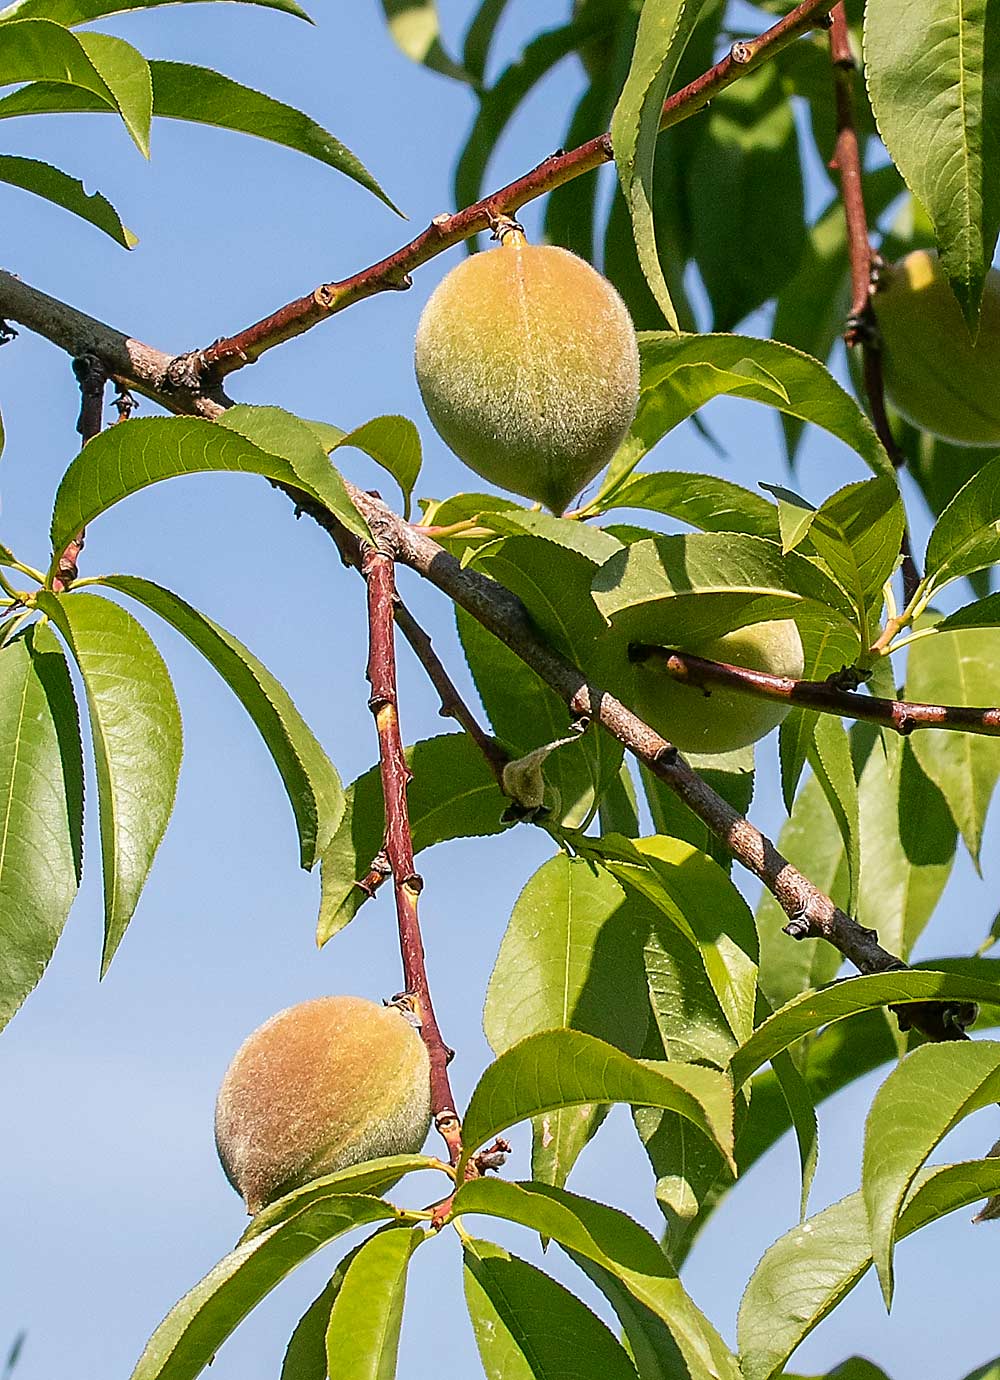 Michigan fresh peaches, like those seen here in a Conklin orchard in June 2022, are considered “local” by two big markets: Detroit and Chicago. (TJ Mullinax/Good Fruit Grower)